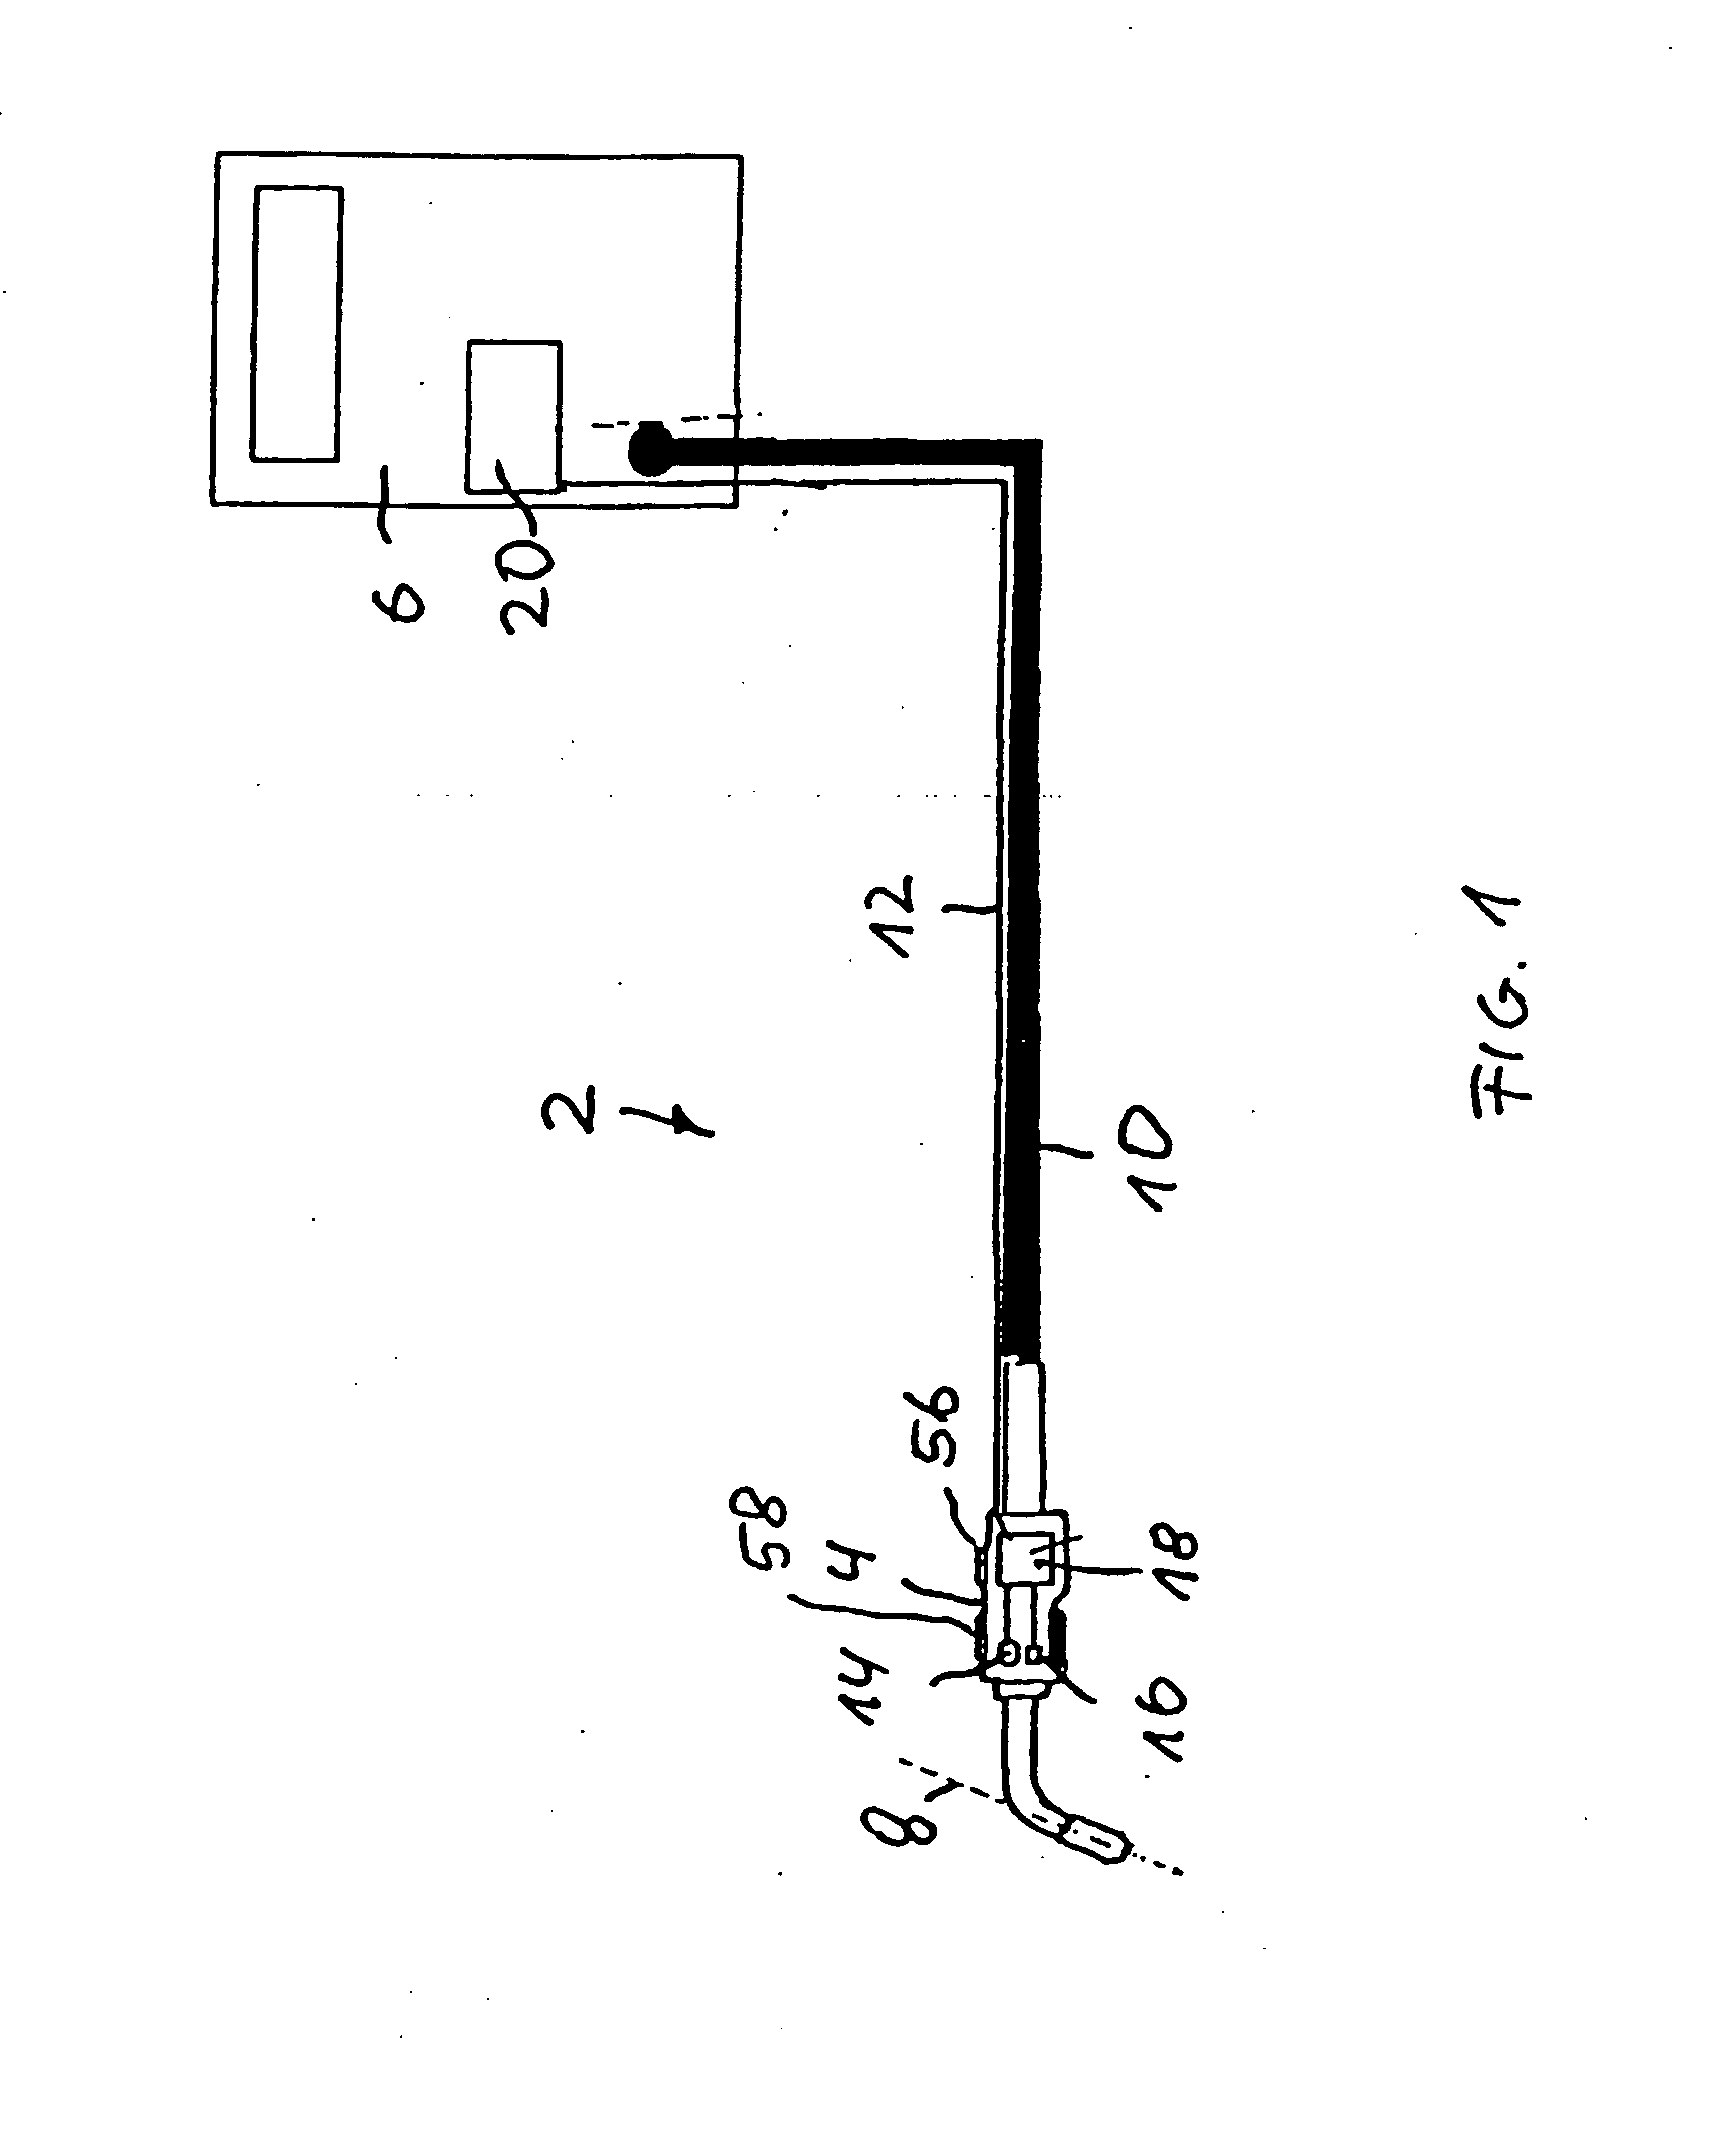 Device for carrying out a joint, separation, or suface treatment process, particularly a welding process